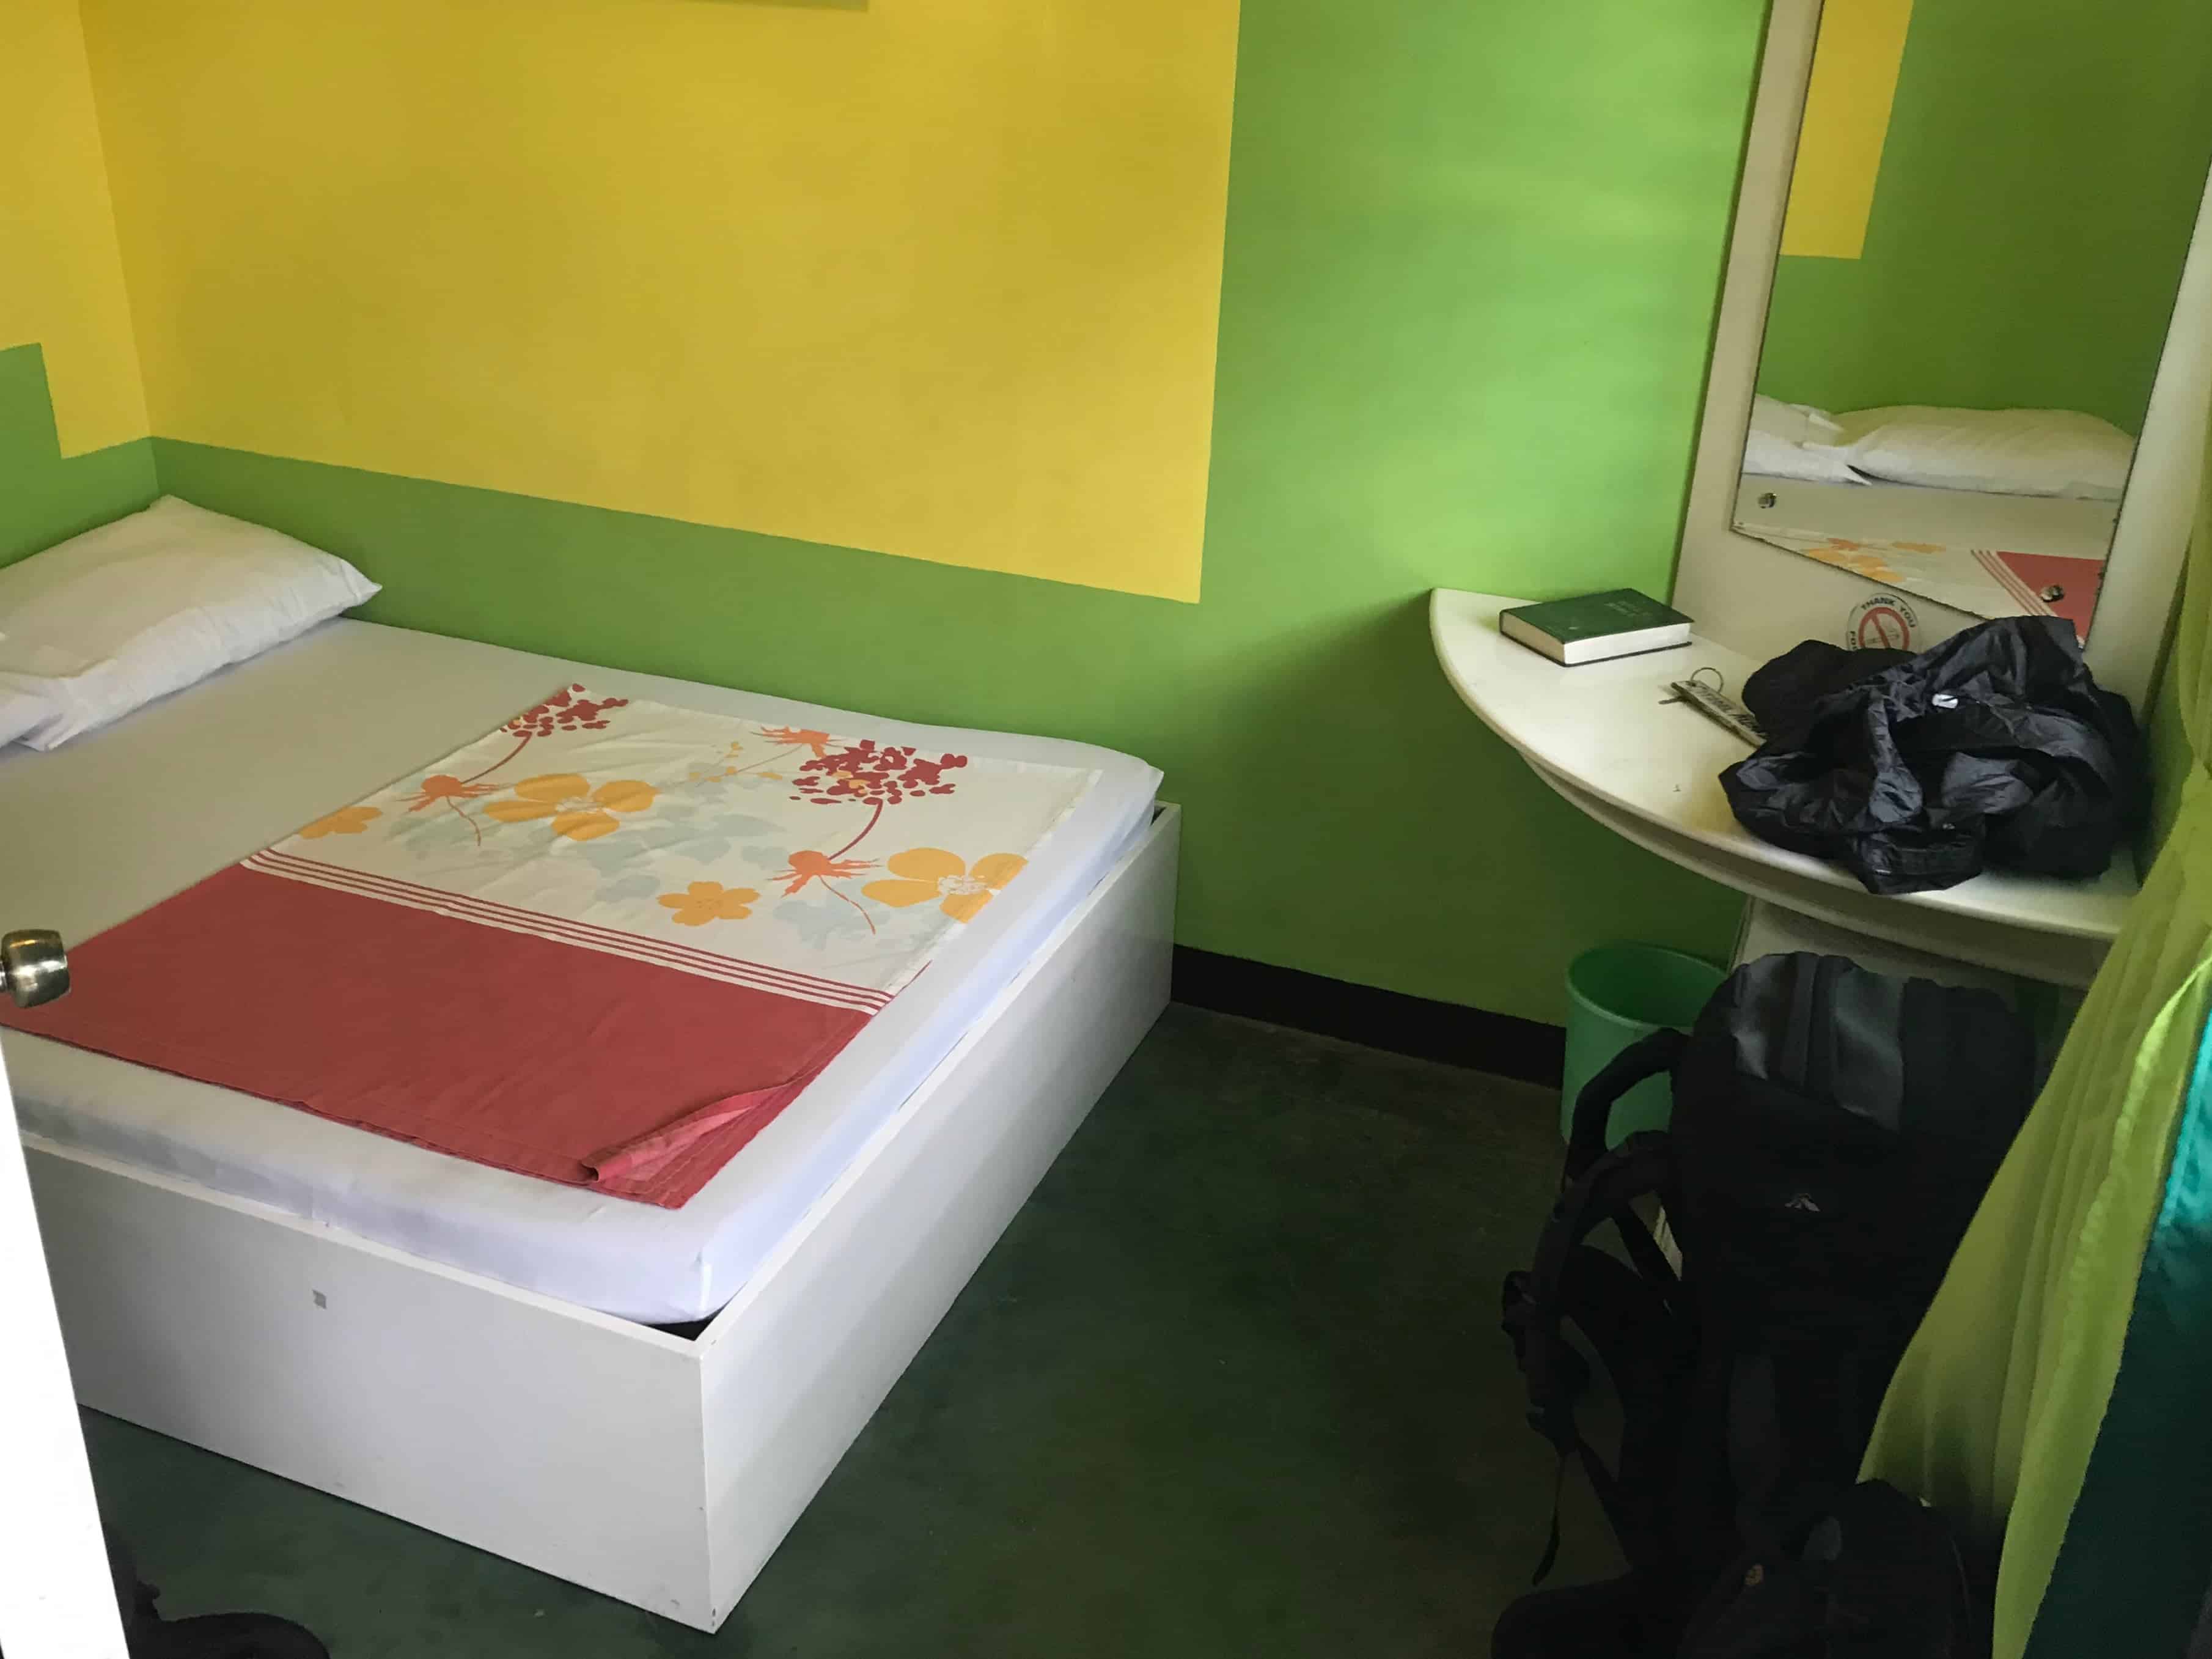 Accommodation in the Philippines is not the most comfortable